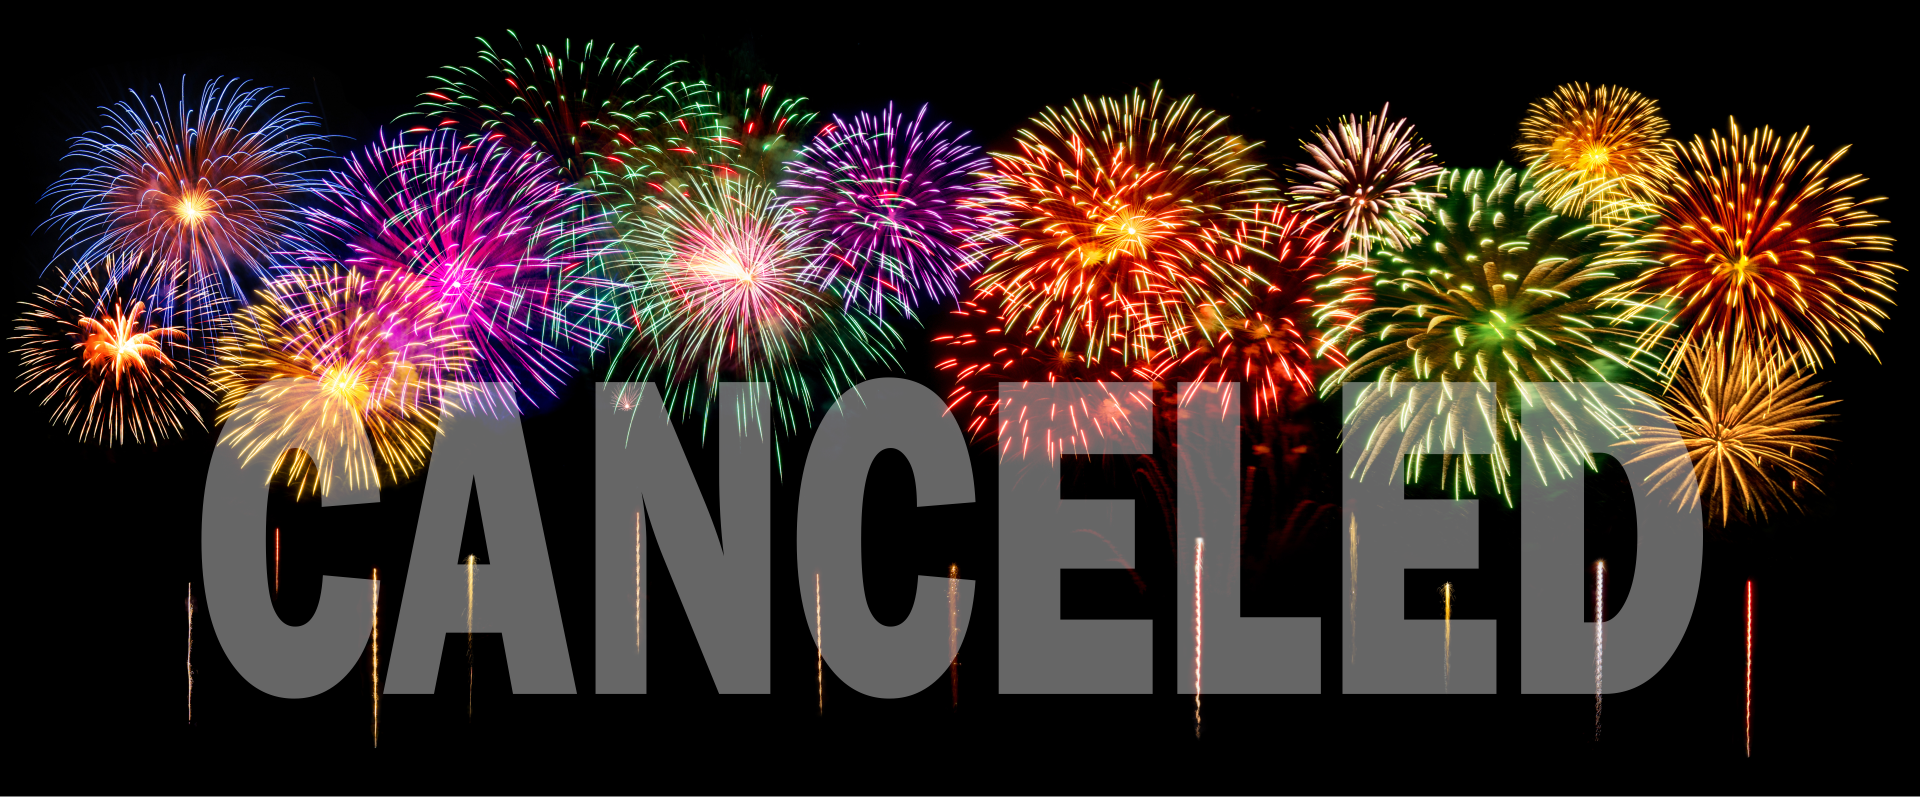 The July 3rd firework display at Lake Pleasant Regional Park has been CANCELED. Click on graphic to learn more.